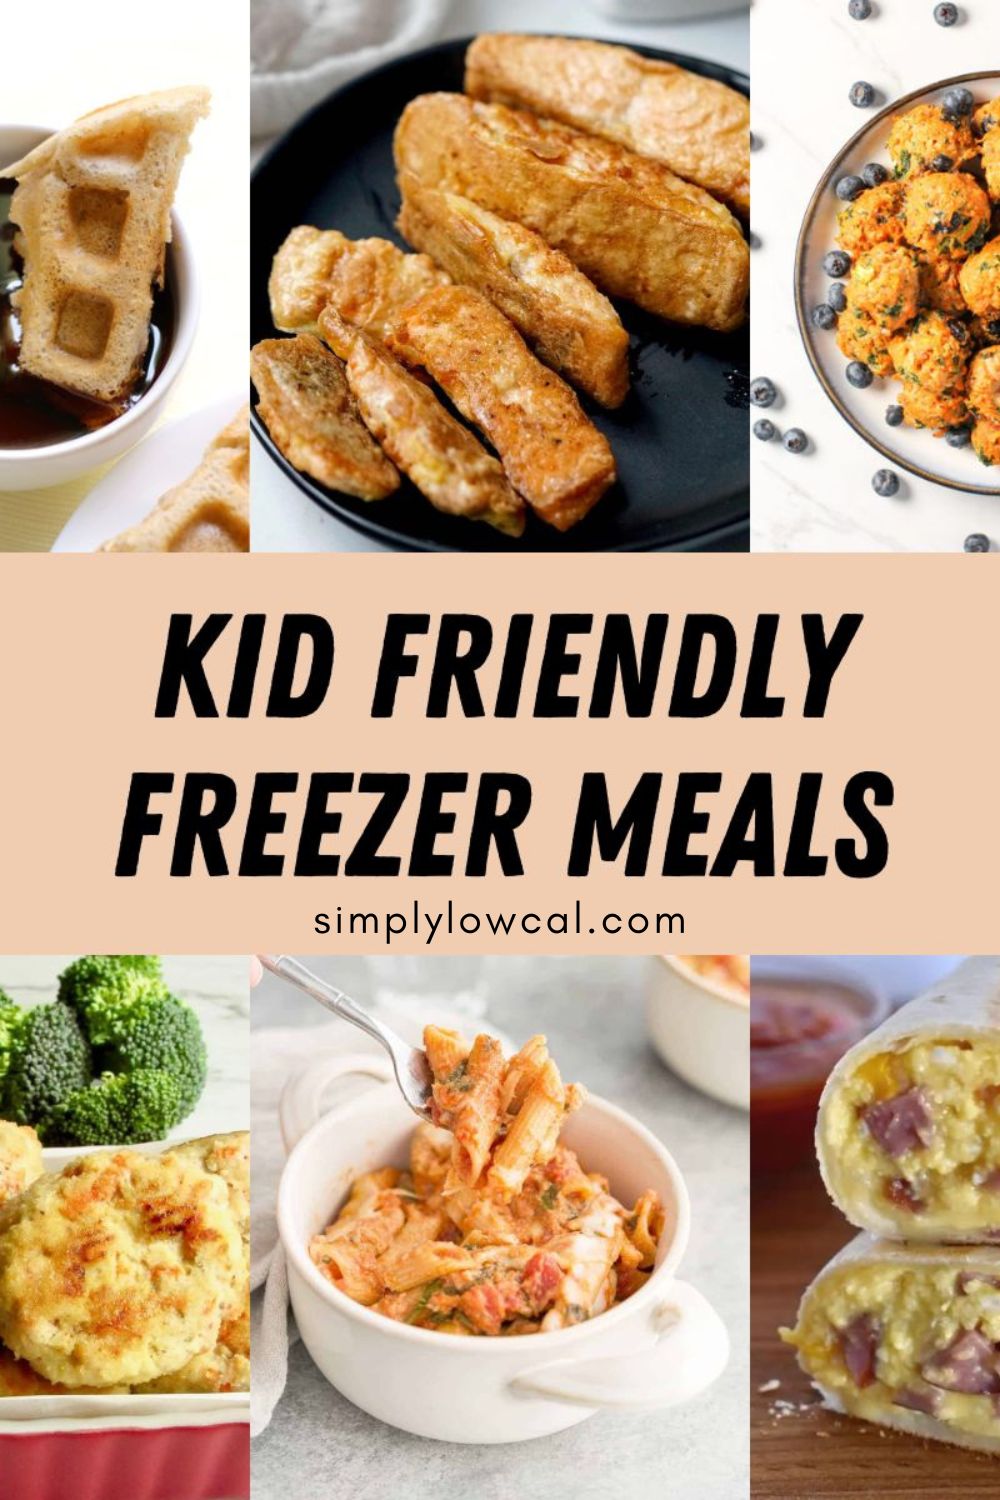 Kid Friendly Freezer Meals - Simply Low Cal